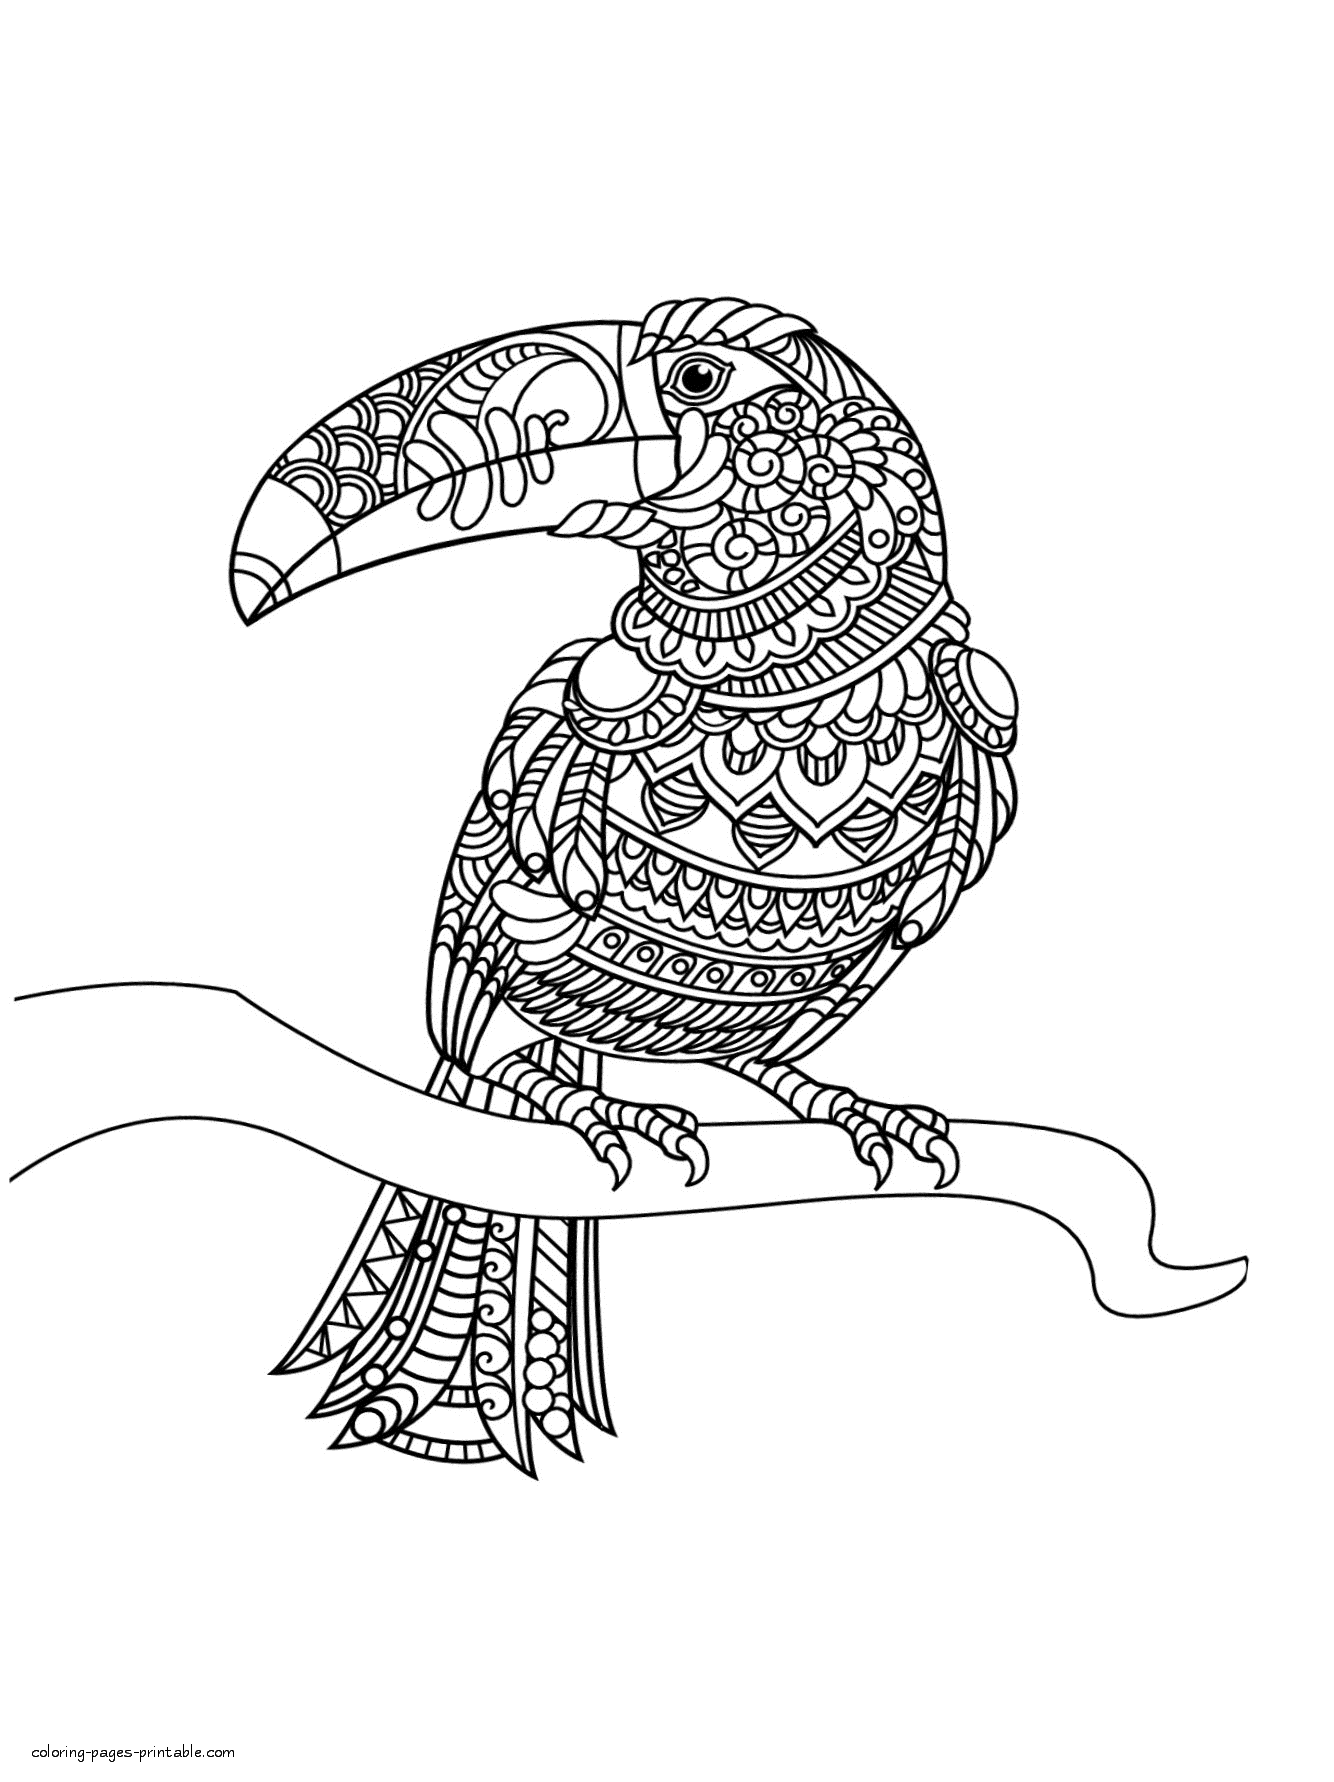 Toucan Coloring Page For Adults || COLORING-PAGES-PRINTABLE.COM